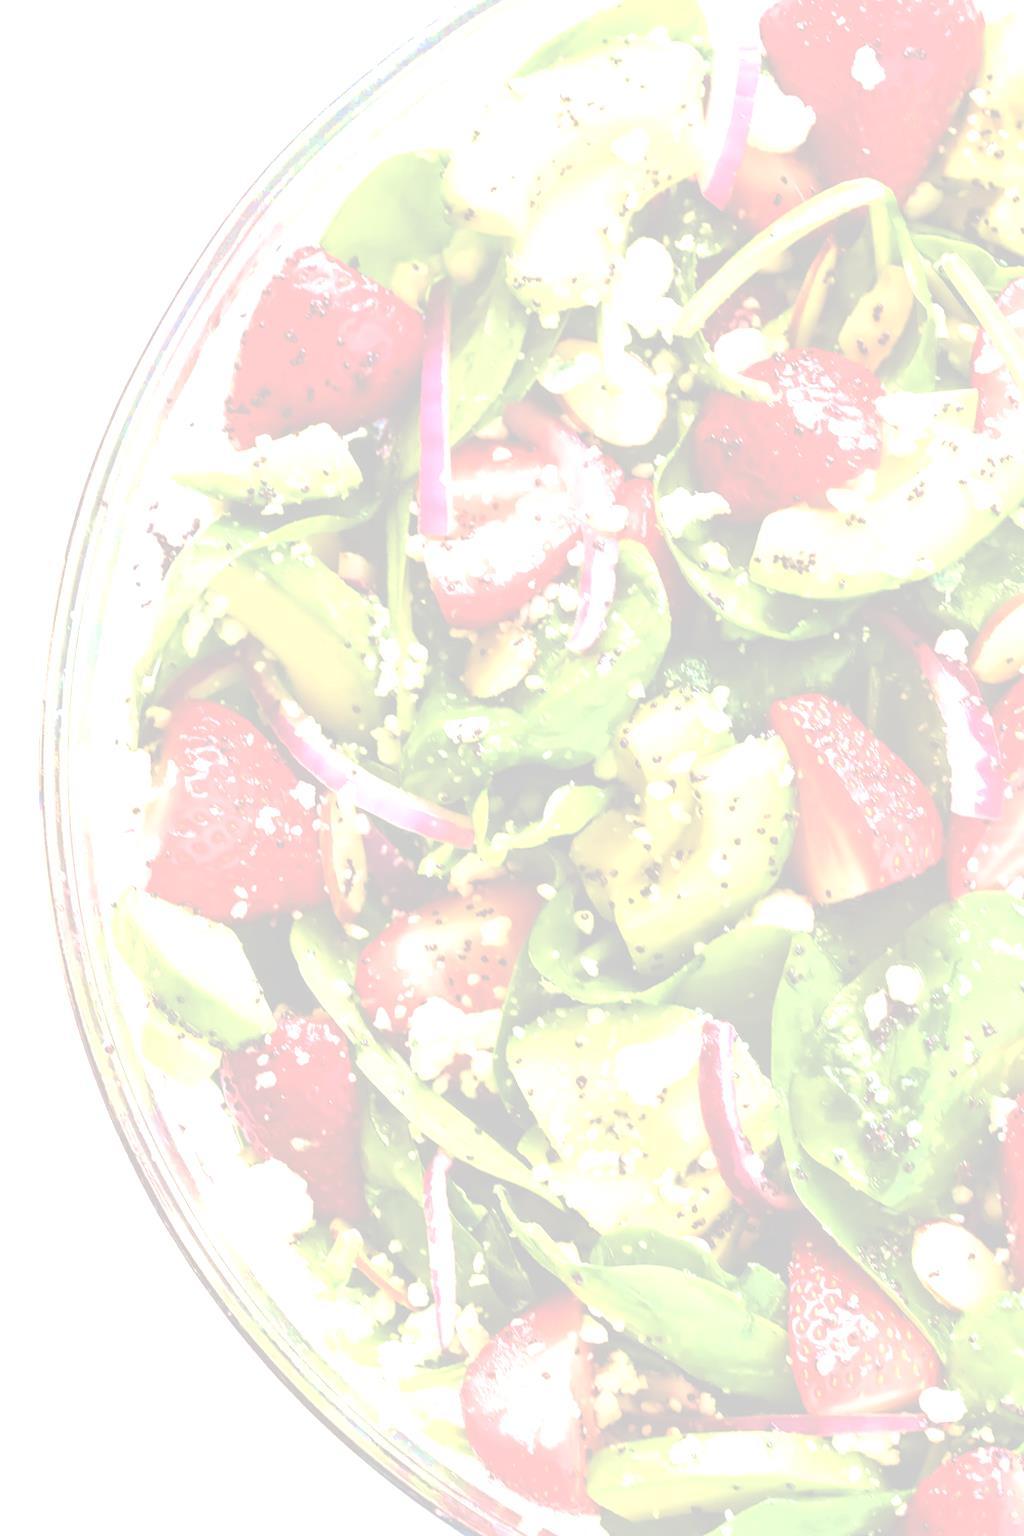 Strawberry Spinach Salad (Adapted from various recipes) For the dressing: 1 cup fresh strawberries ¼ cup packed fresh basil 3 tablespoons fresh lemon juice 1 tablespoon extra virgin olive oil 1-2